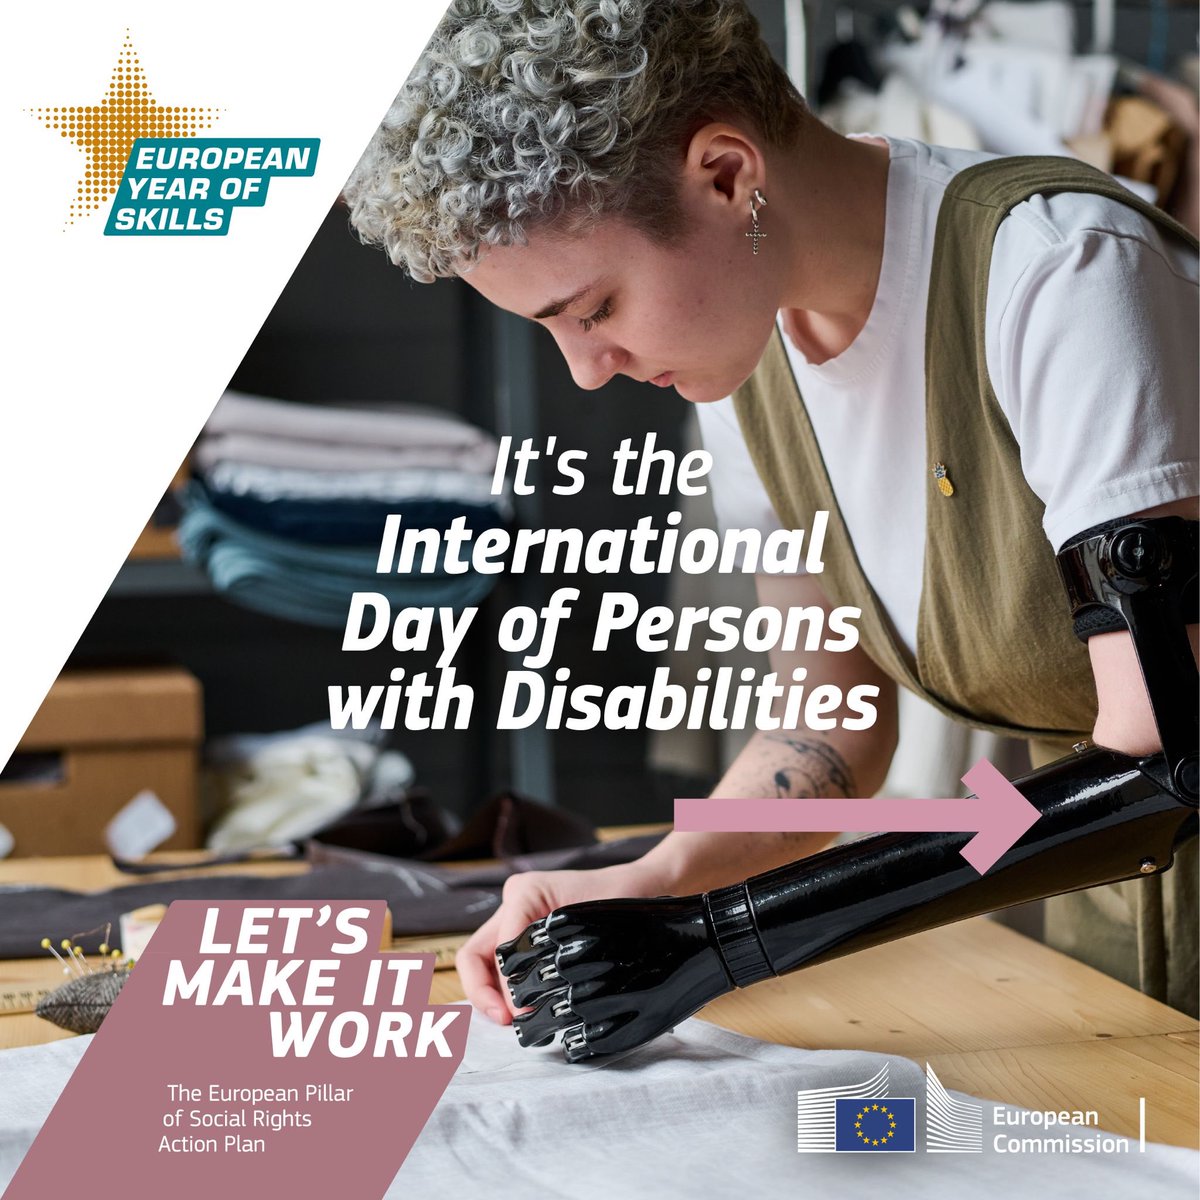 Today is the International Day of Persons with Disabilities.
 
Ongoing @EU_Commission #EUDisabilityRights work to improve the lives of persons with disabilities includes:
- #EUDisabilityCard & #EUParkingCard
- A package to improve labour market outcomes
 
#IDPD #UnionOfEquality